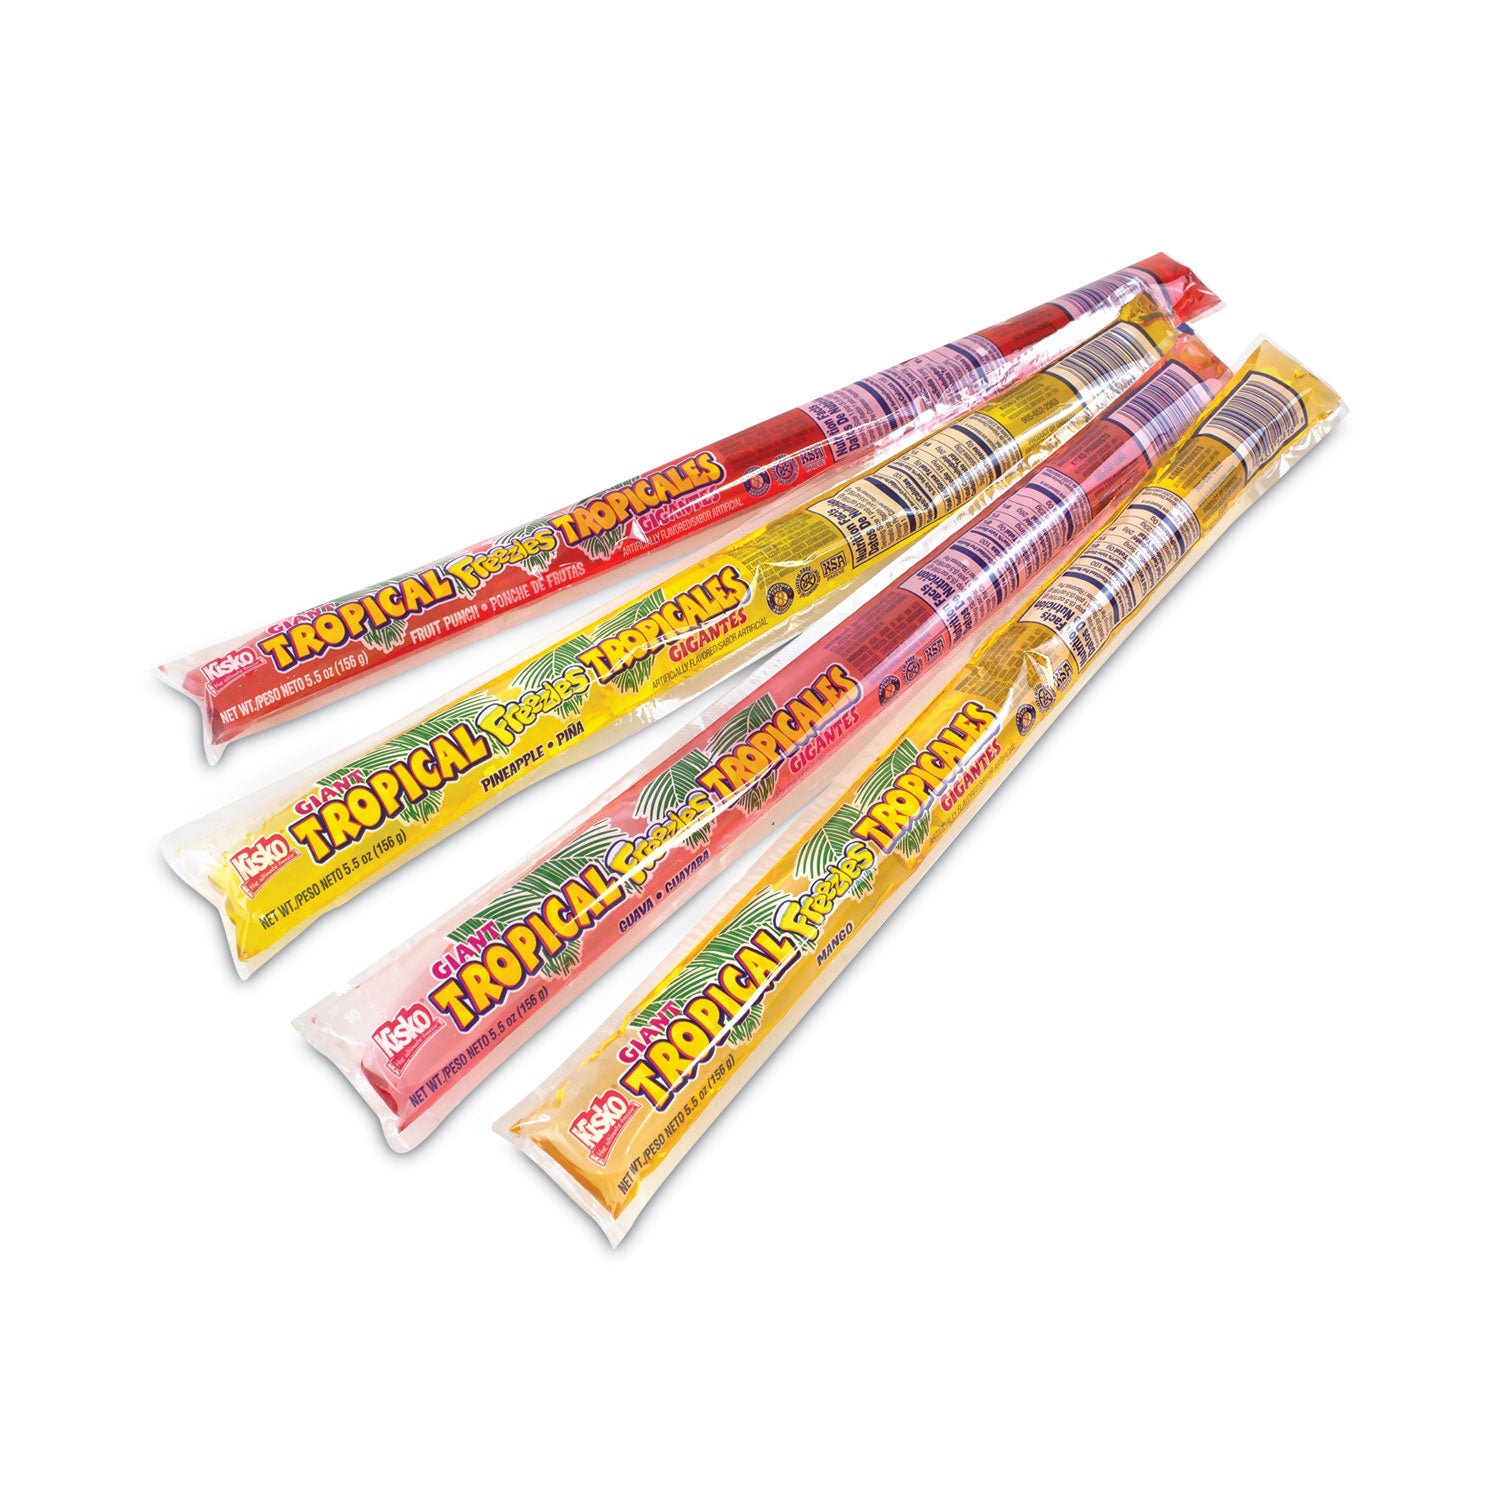 giant-tropical-freezies-ice-pops-55-oz-tube-fruit-punch-guava-mango-pineapple-50-carton-ships-in-1-3-business-days_grr20900478 - 1